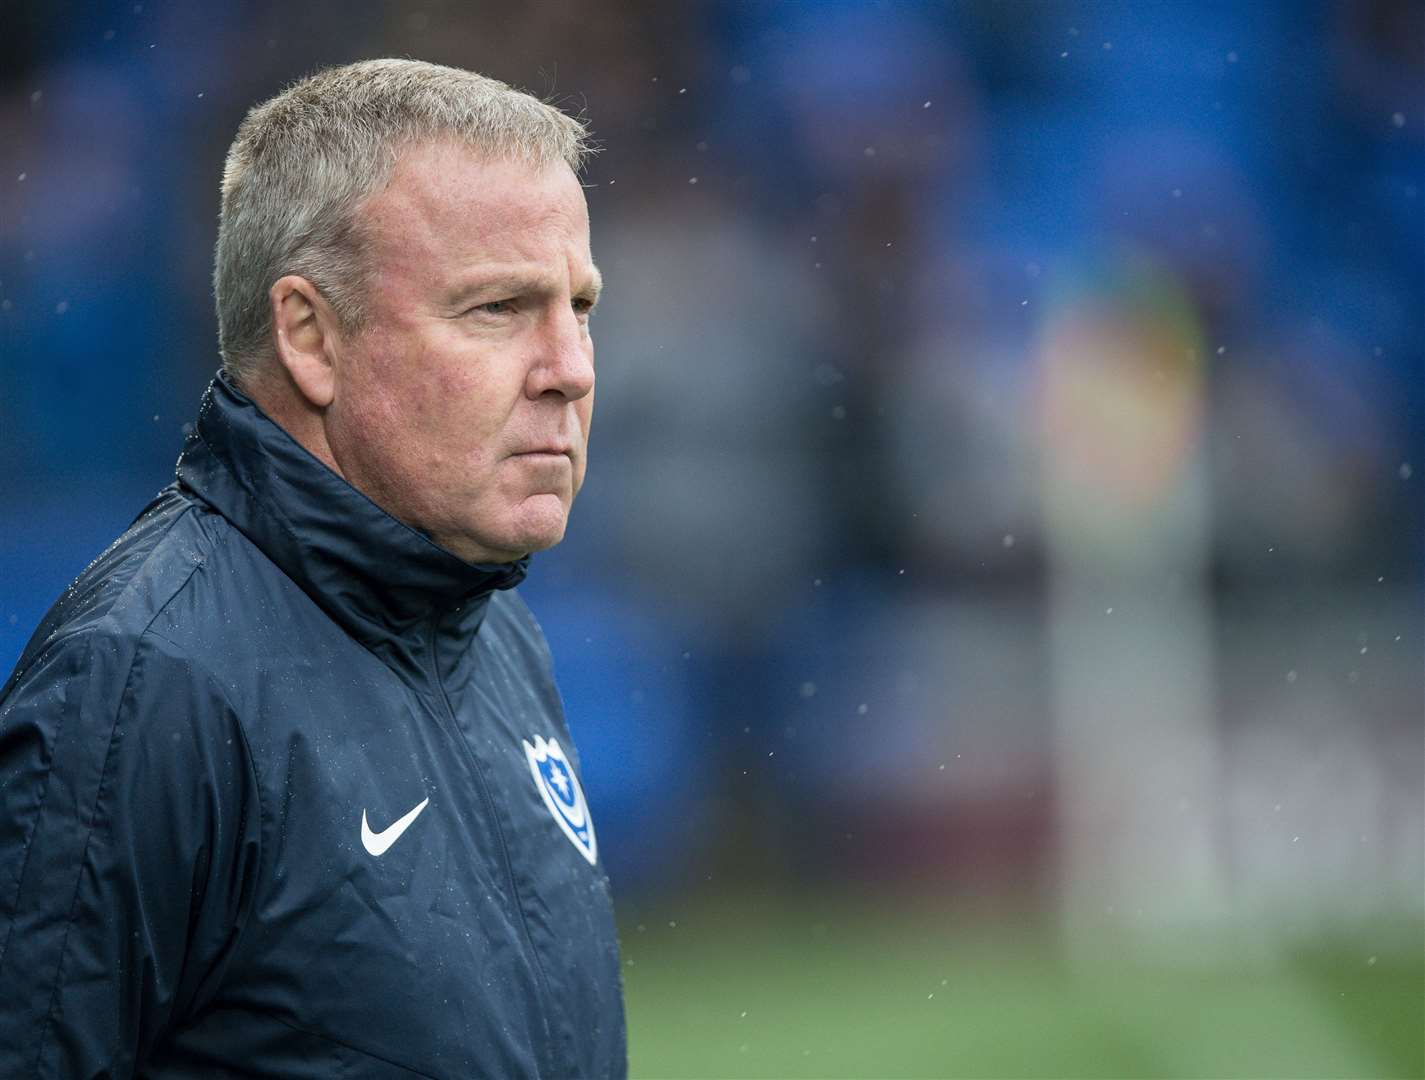 Portsmouth manager Kenny Jackett may call off their game with Gillingham